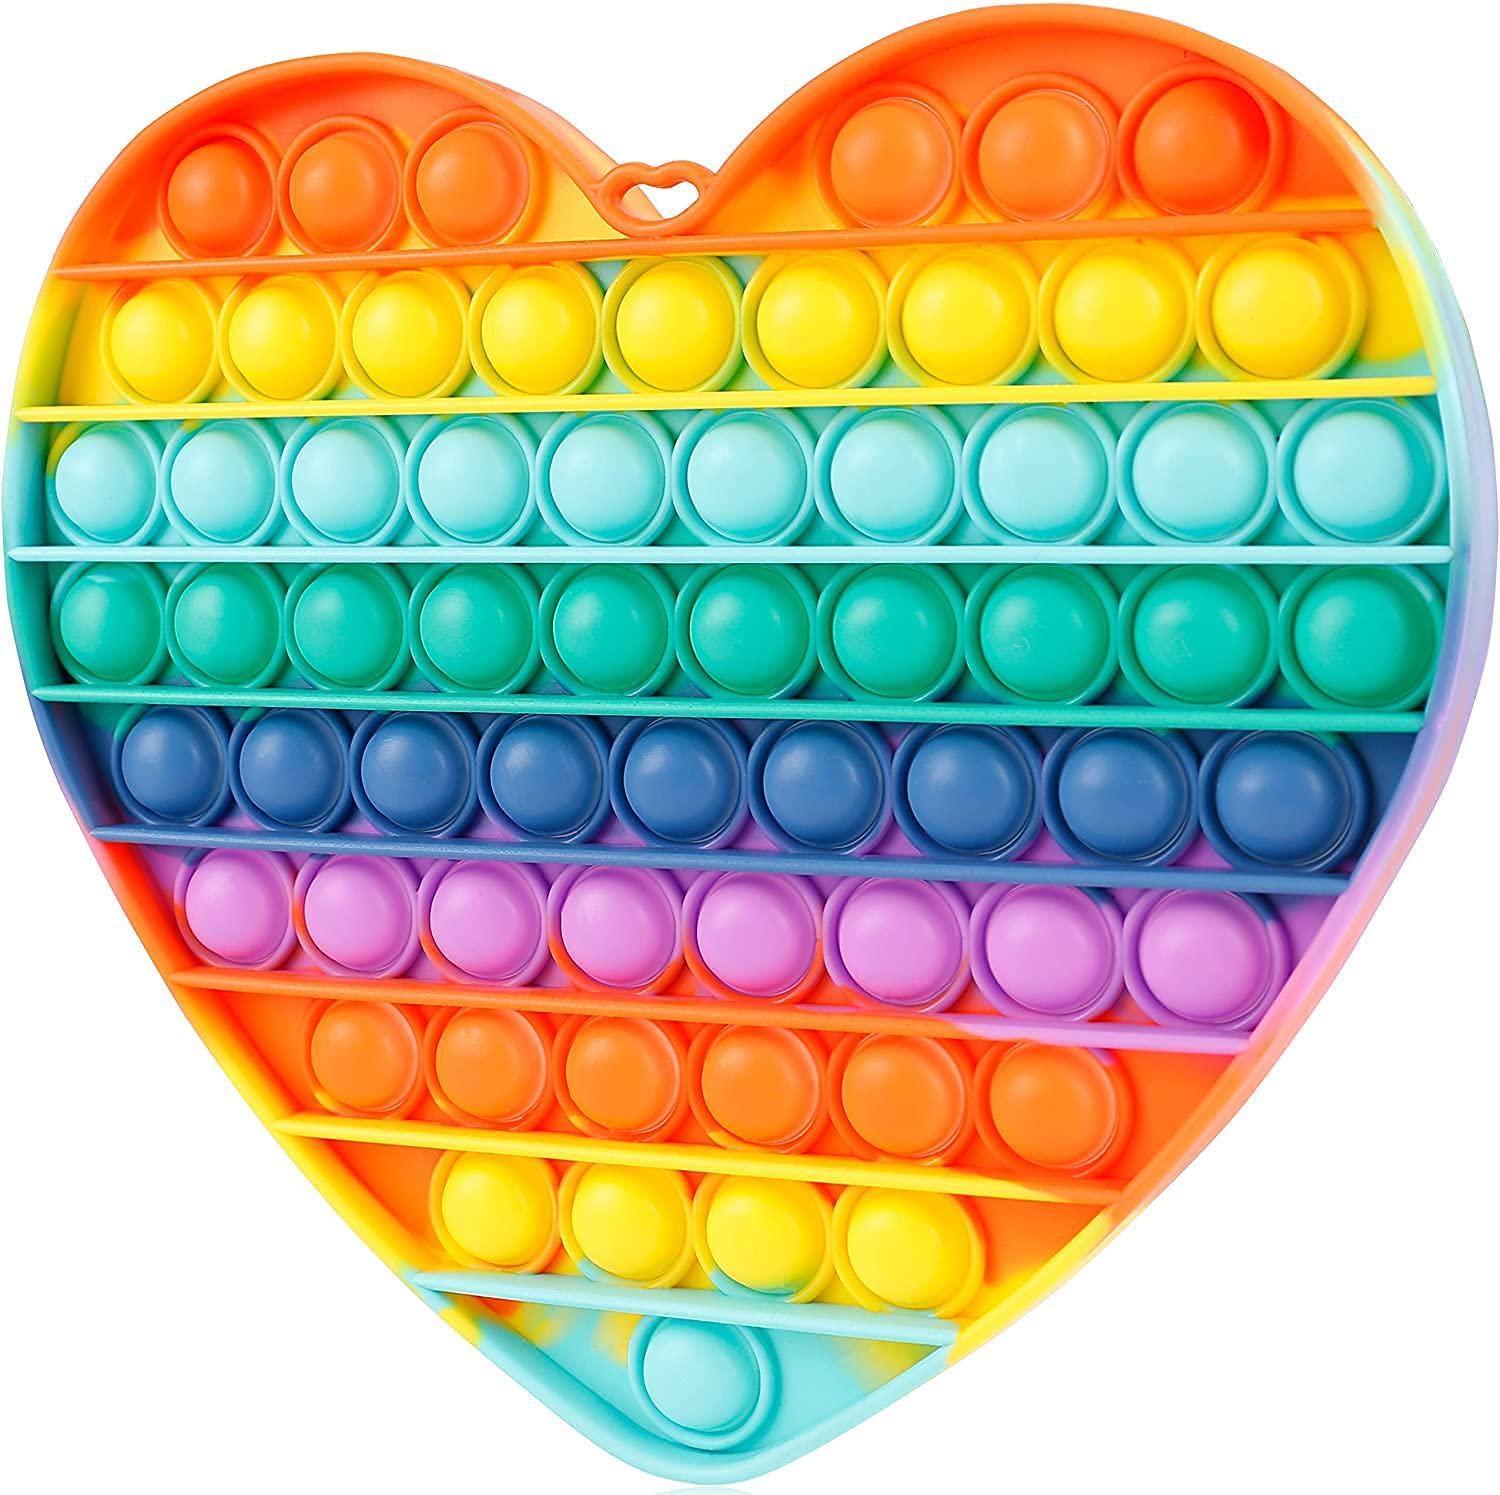 Nothers, Giant Popit Fidget Toy for Kids Teens Adult, Mega Big Jumbo Huge Large Push Poppop Pop Poop Popper it Figetget Sensory ADHD Anxiety Austim Stress Relief Game Cardioid Rainbow Heart